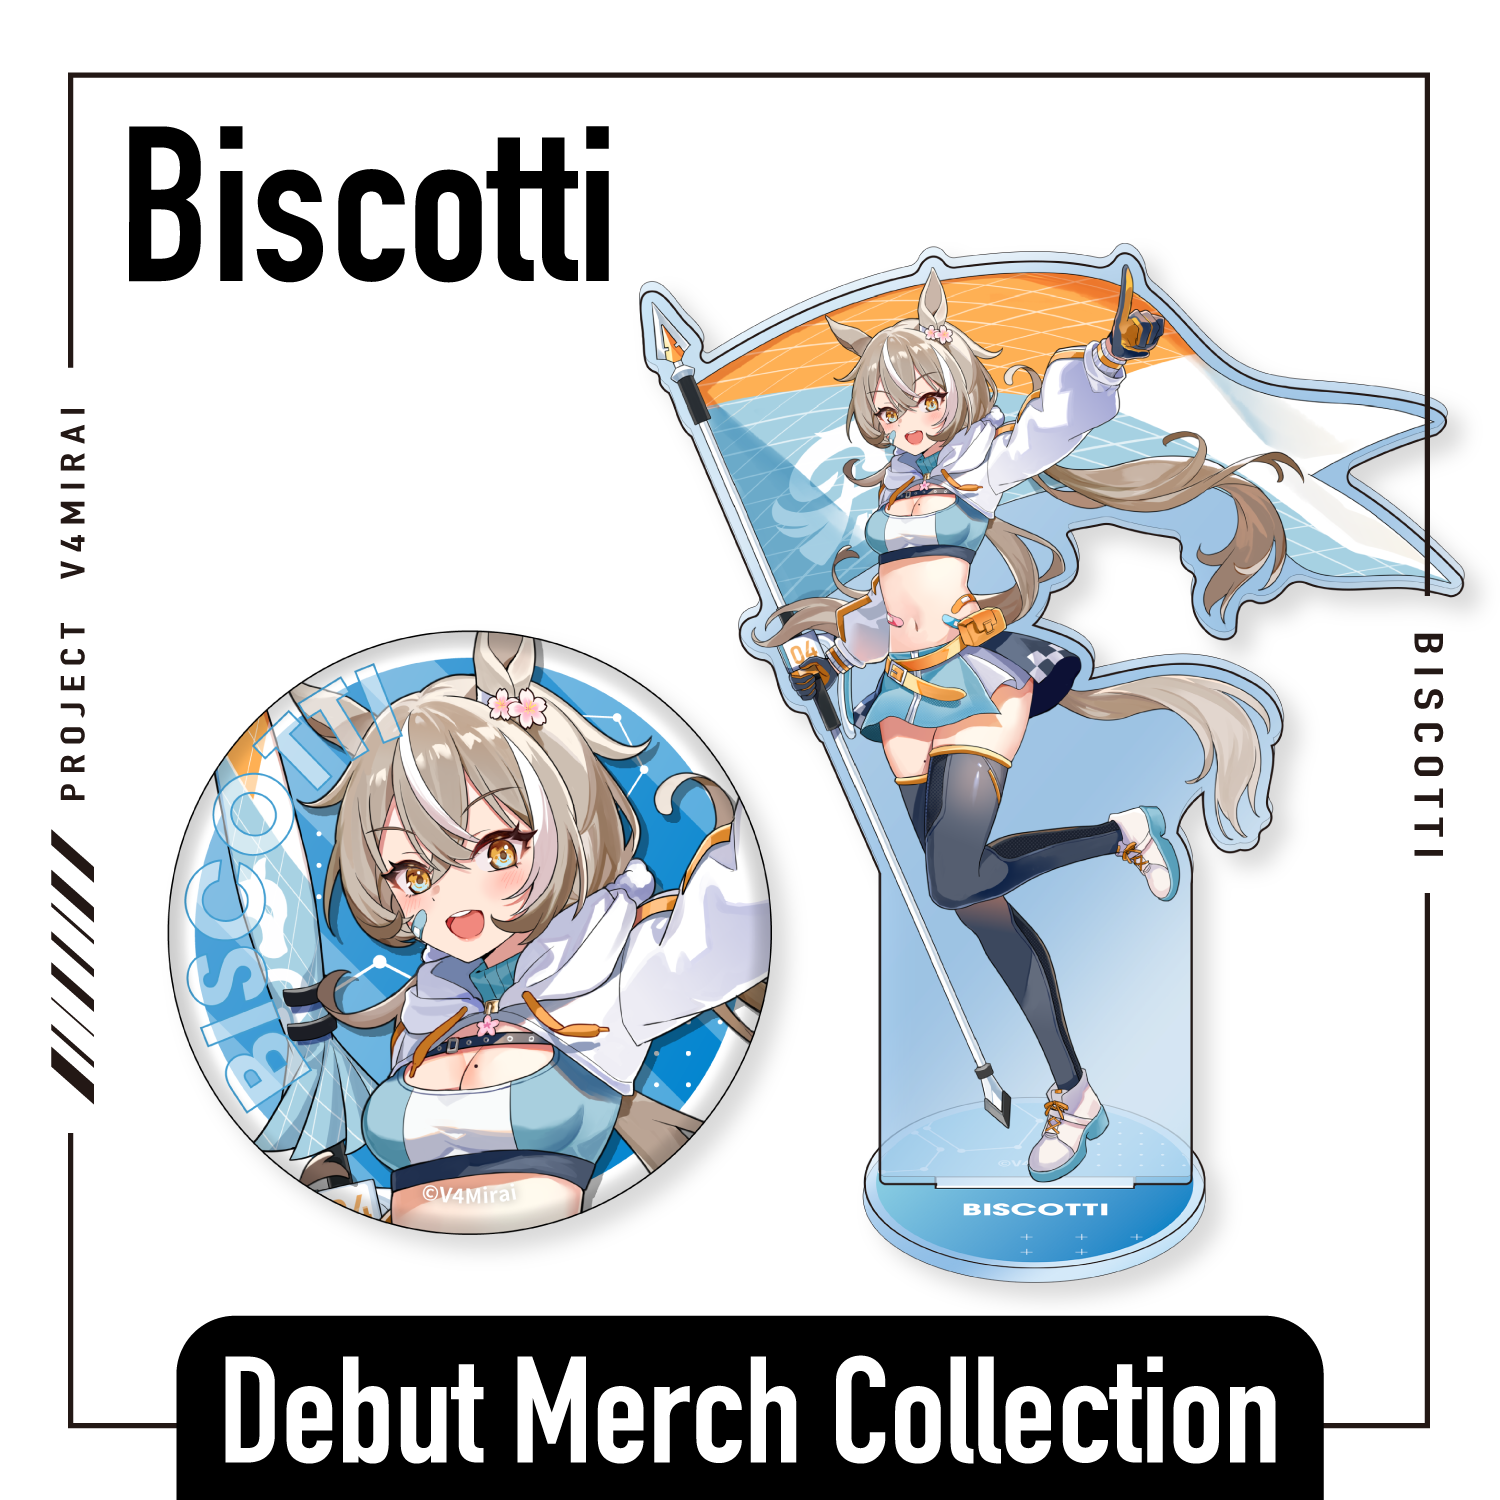 Biscotti - Debut Merch Collection